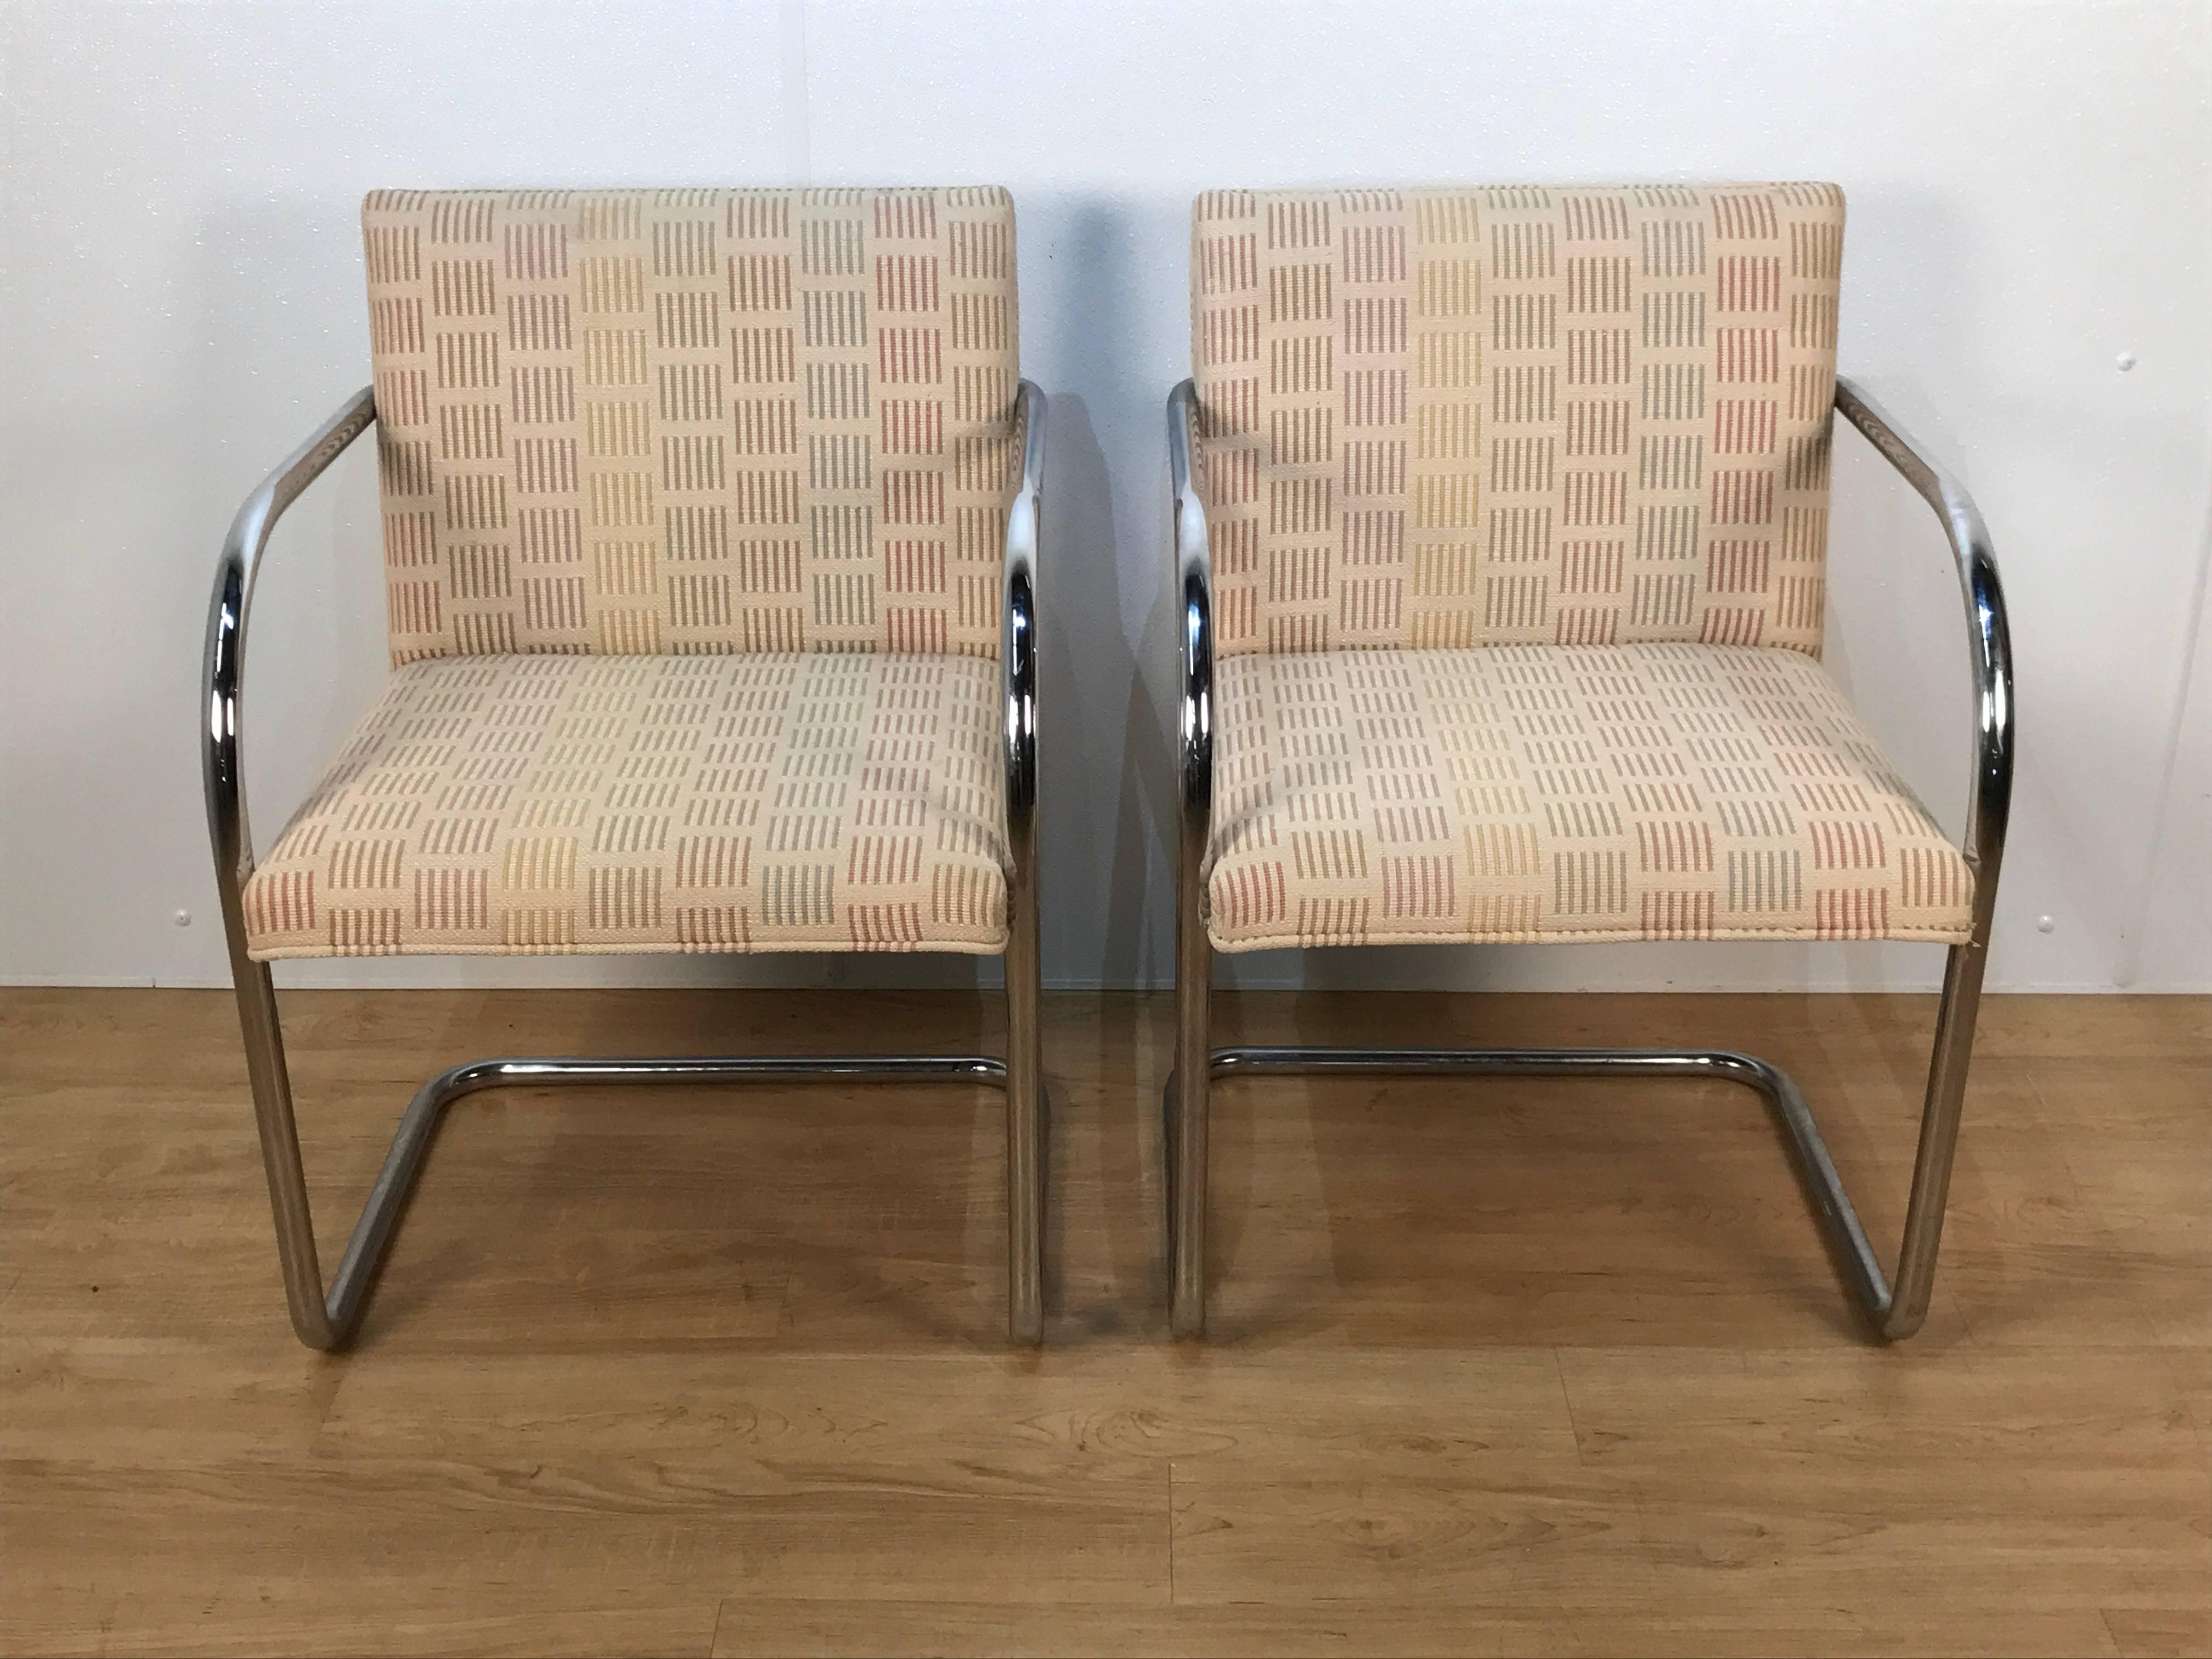 Eight Mid-Century Brono tubular chairs, designed by Ludwig Mies van der Rohe, each one with tubular chrome steel cantilevered frames and vintage upholstery
Originally designed by Mies van der Rohe for his Tugendhat House in Brno, Czech Republic, in